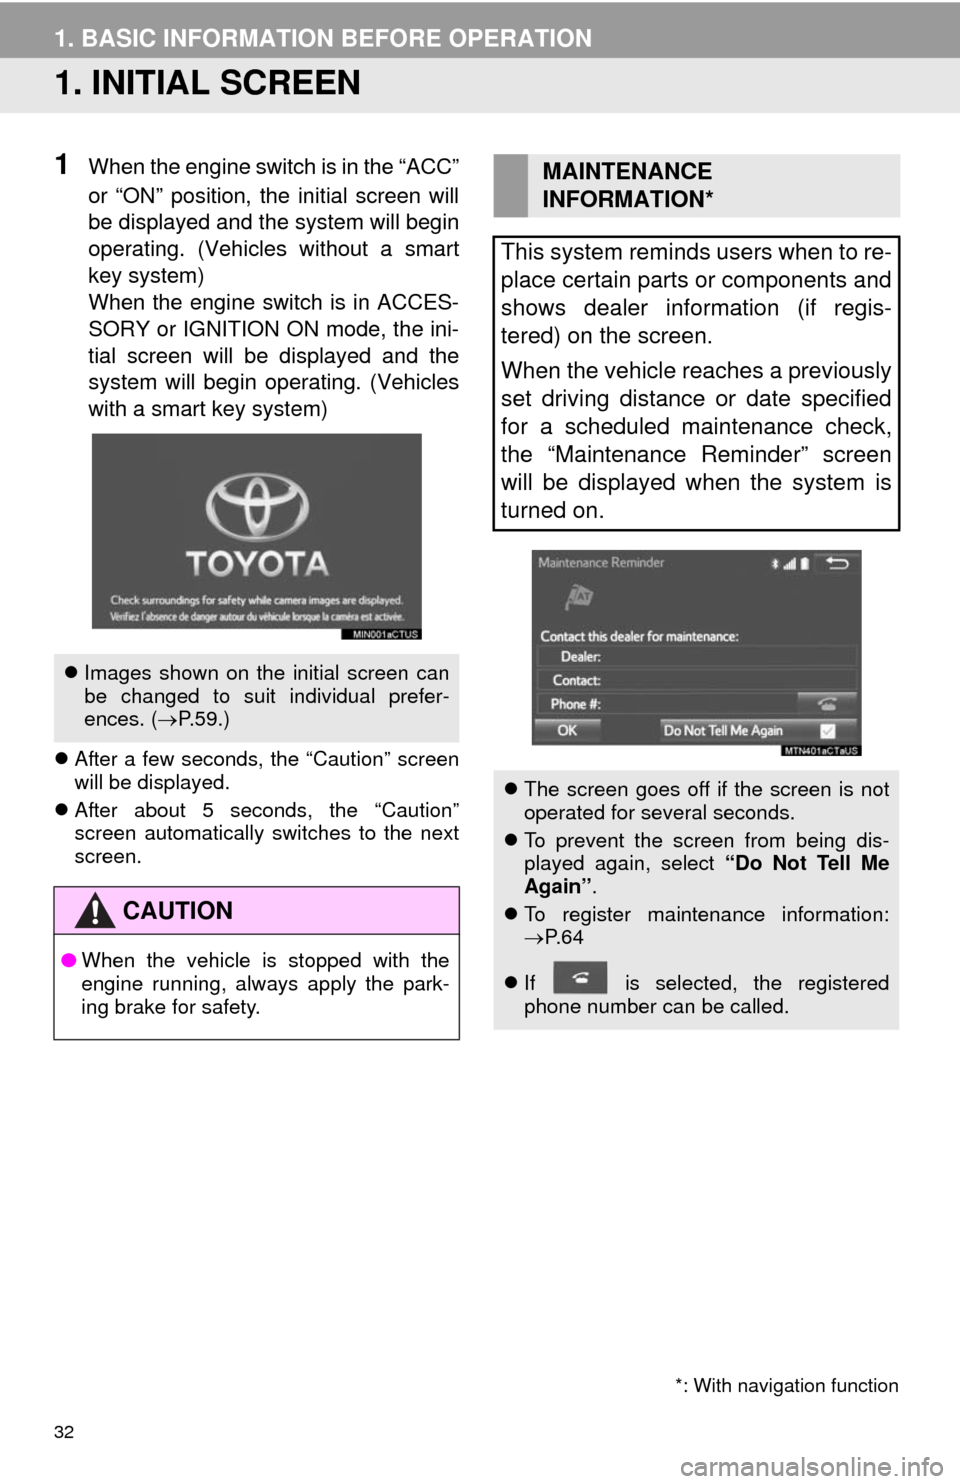 TOYOTA 4RUNNER 2014 N280 / 5.G Navigation Manual 32
1. BASIC INFORMATION BEFORE OPERATION
1. INITIAL SCREEN
1When the engine switch is in the “ACC”
or “ON” position, the initial screen will
be displayed and the system will begin
operating. (